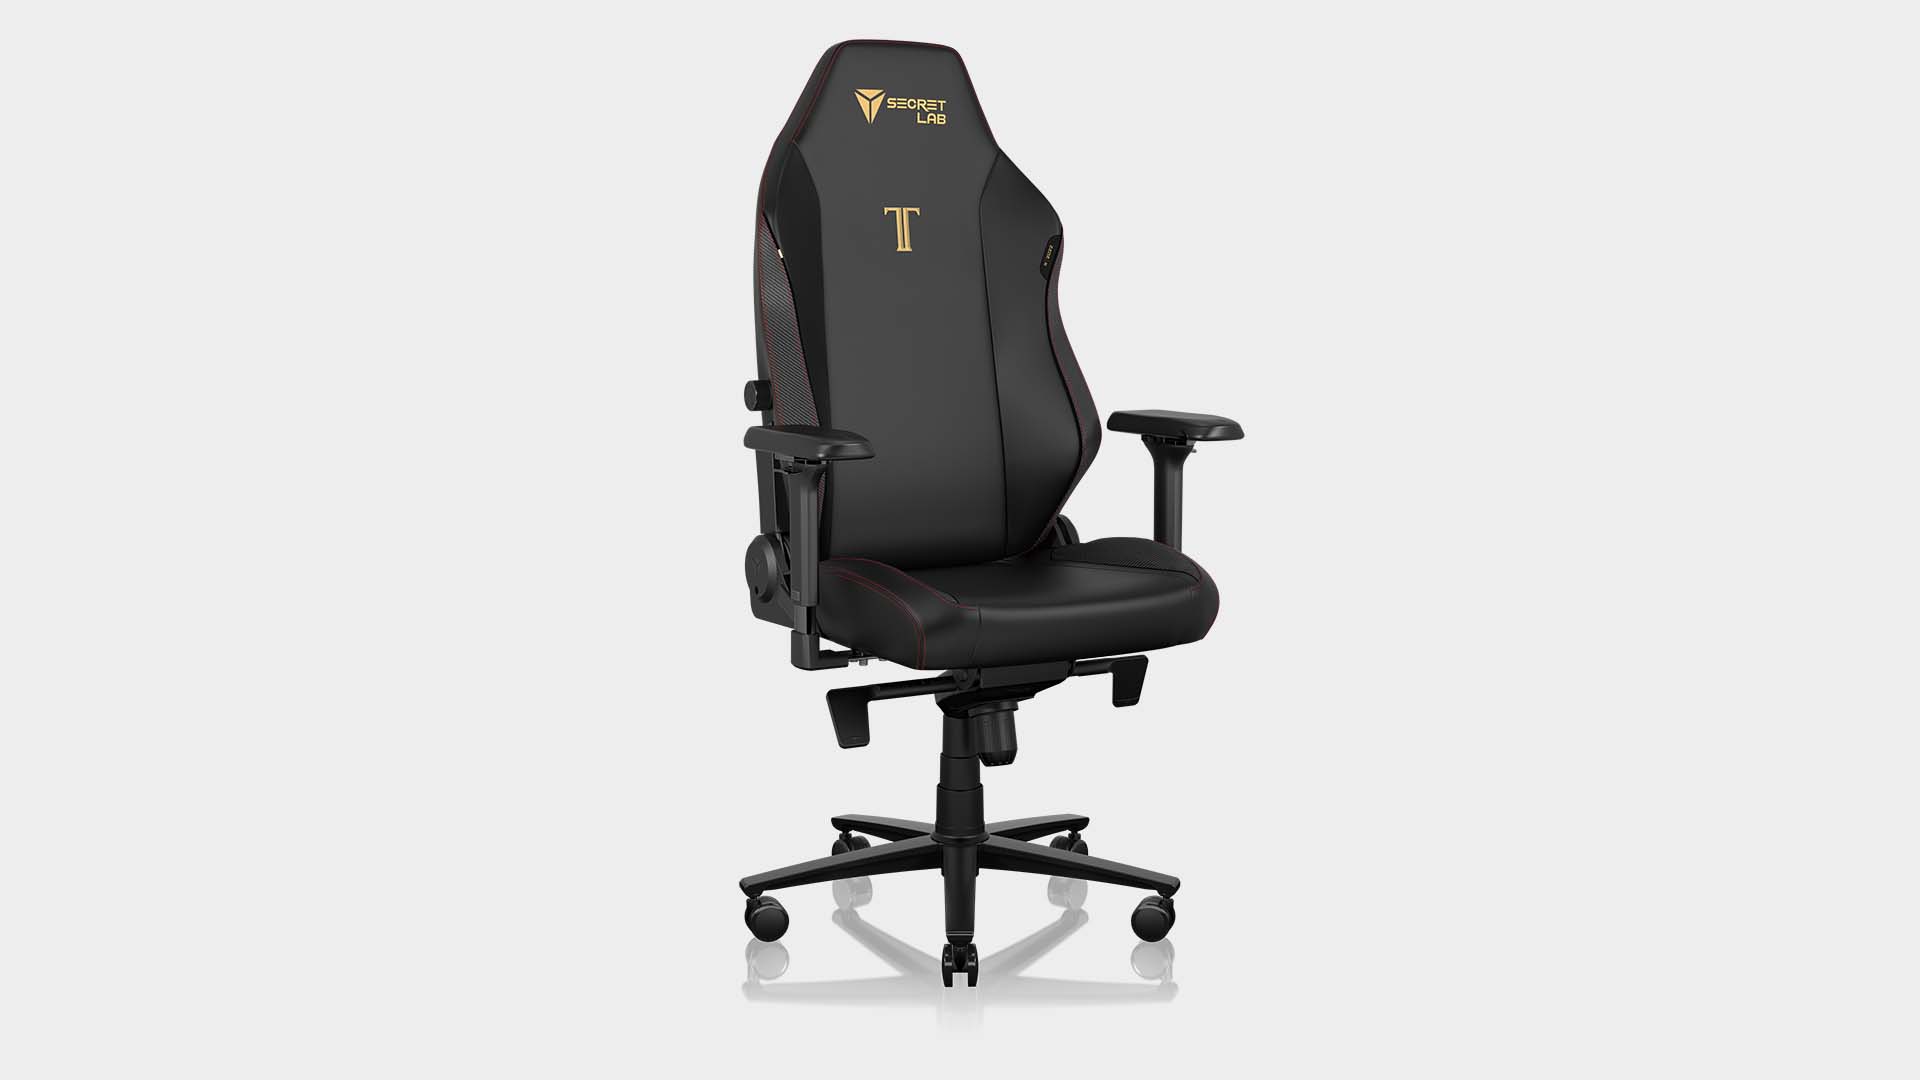 Secretlab Titan Evo 2022 gaming chair on a grey background at various 360° angles.